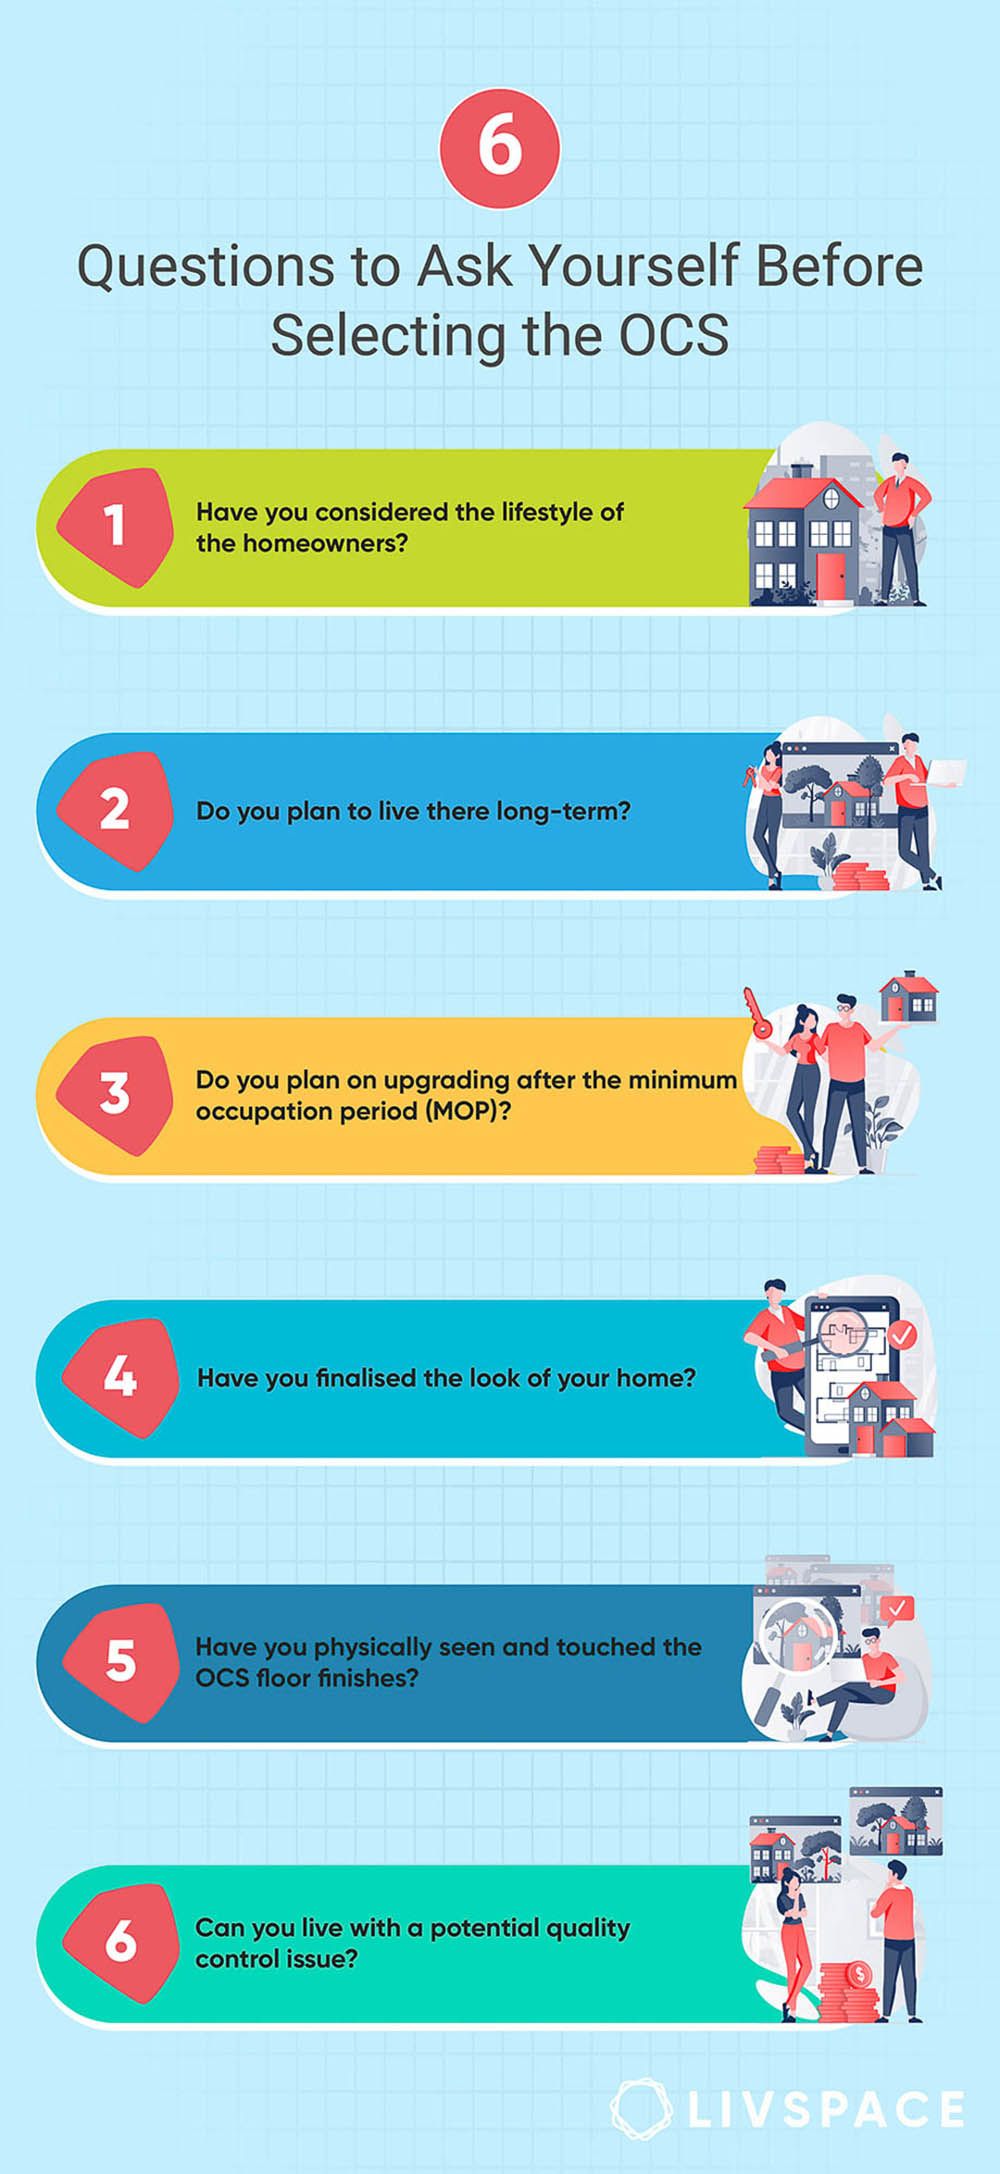 hdb-ocs-questions-to-ask-yourself-infographic